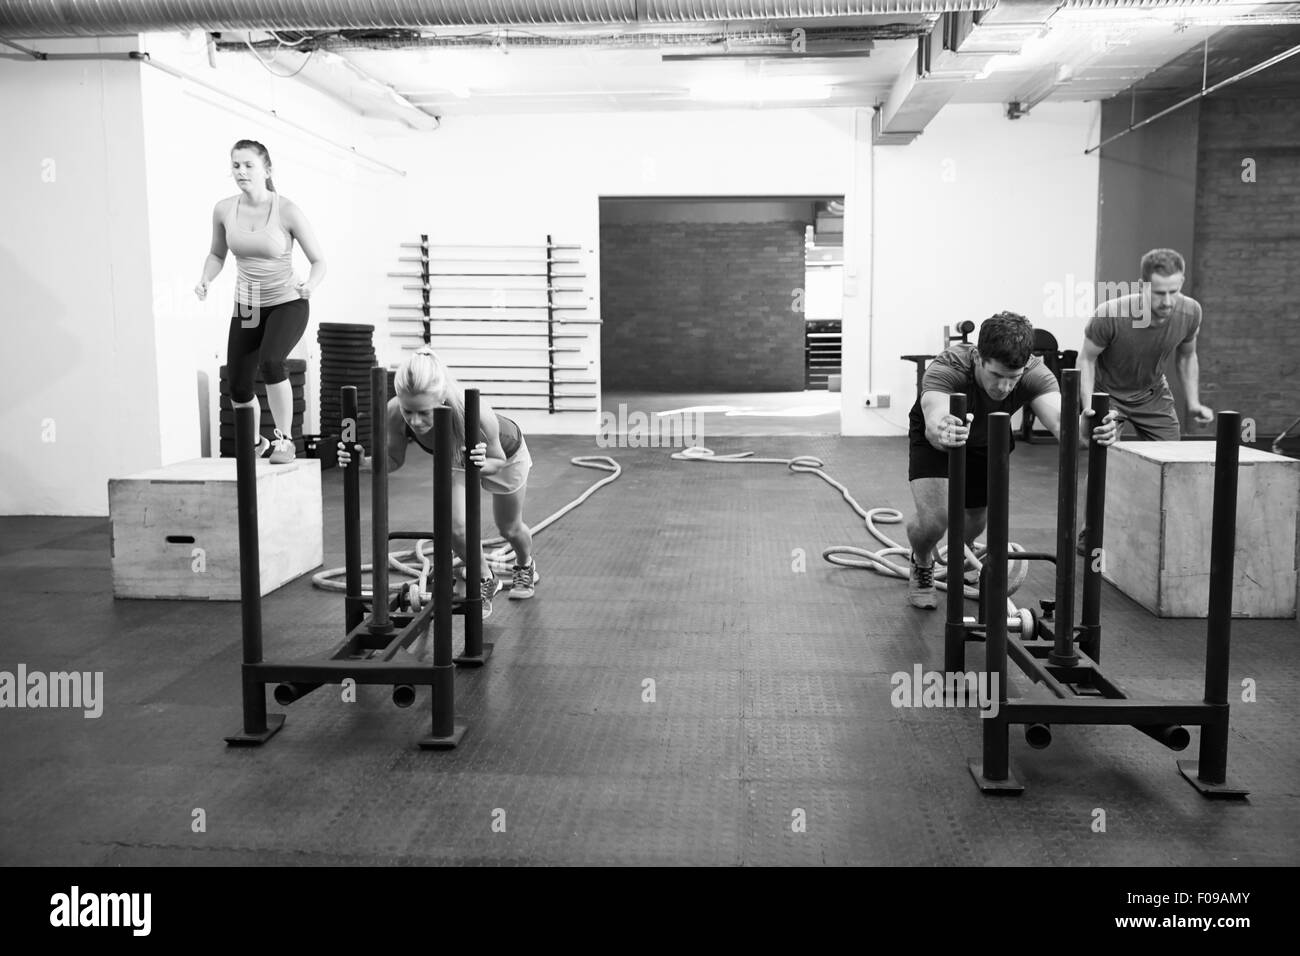 Black And White Shot Of People In Gym Circuit Training Stock Photo